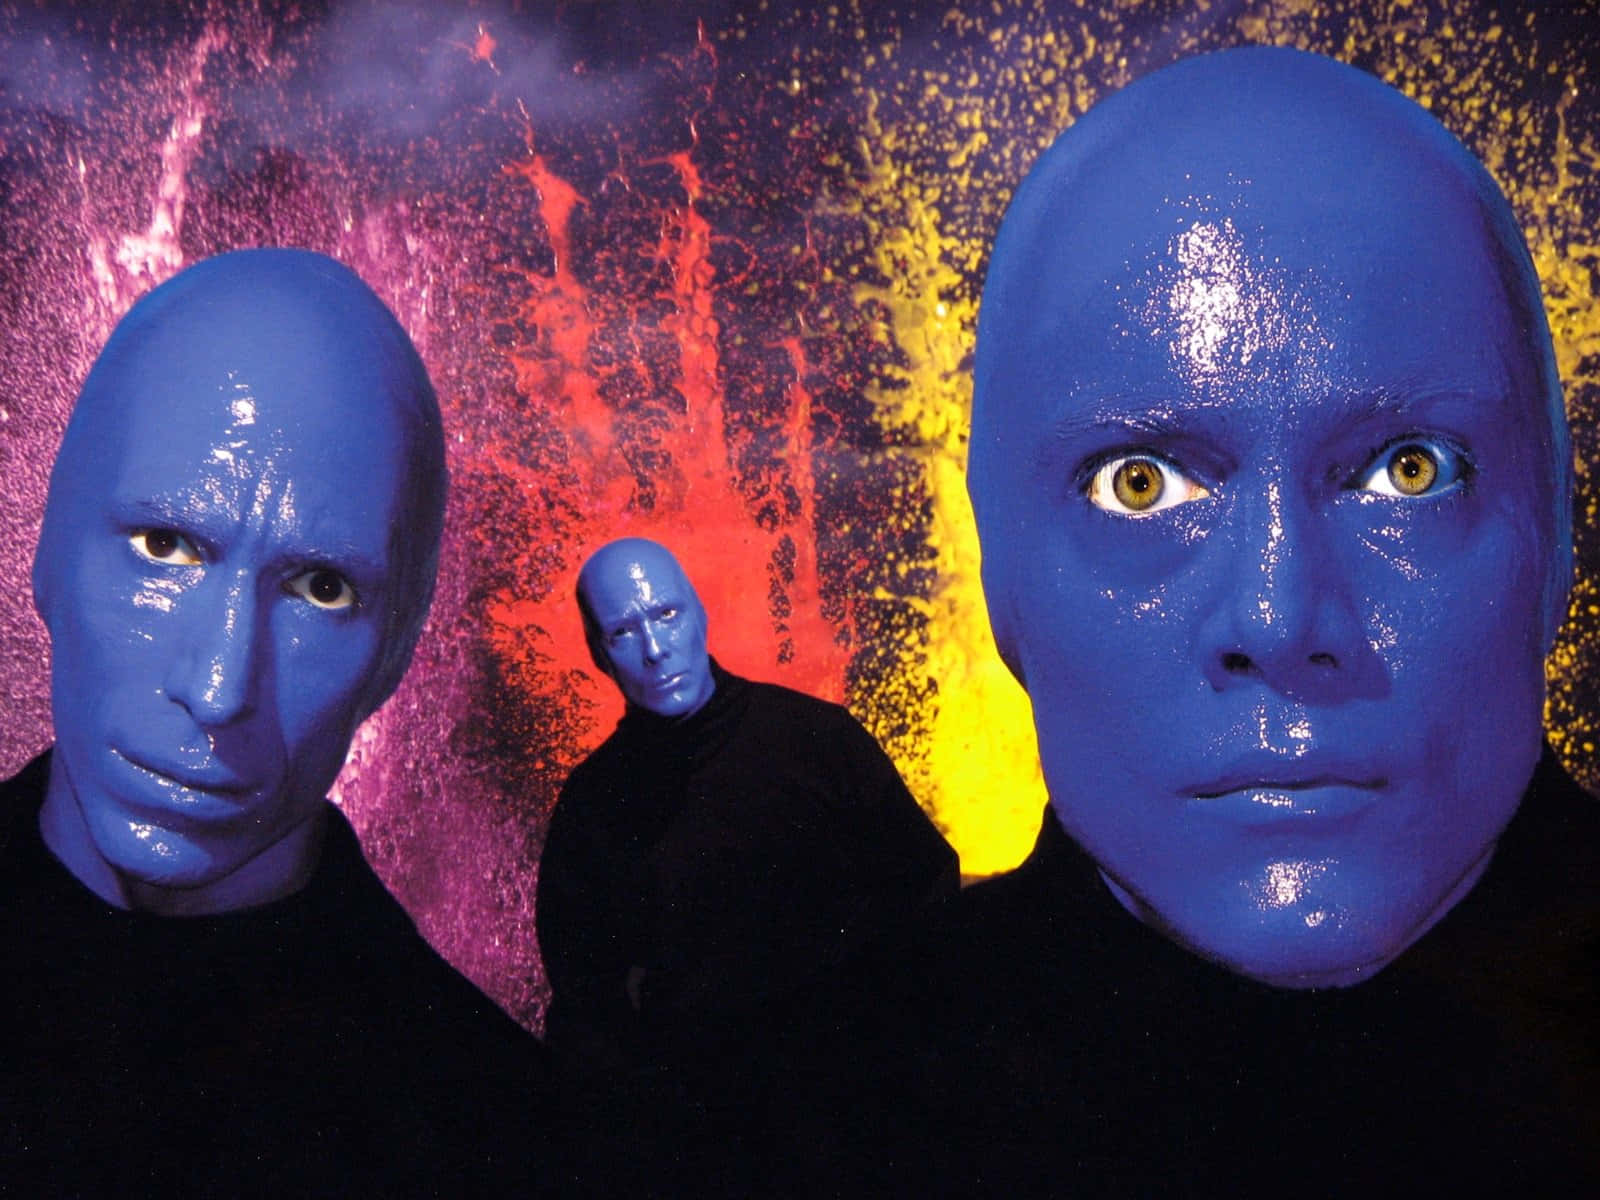 Enjoy the creative, musical performance of the Blue Man Group Wallpaper